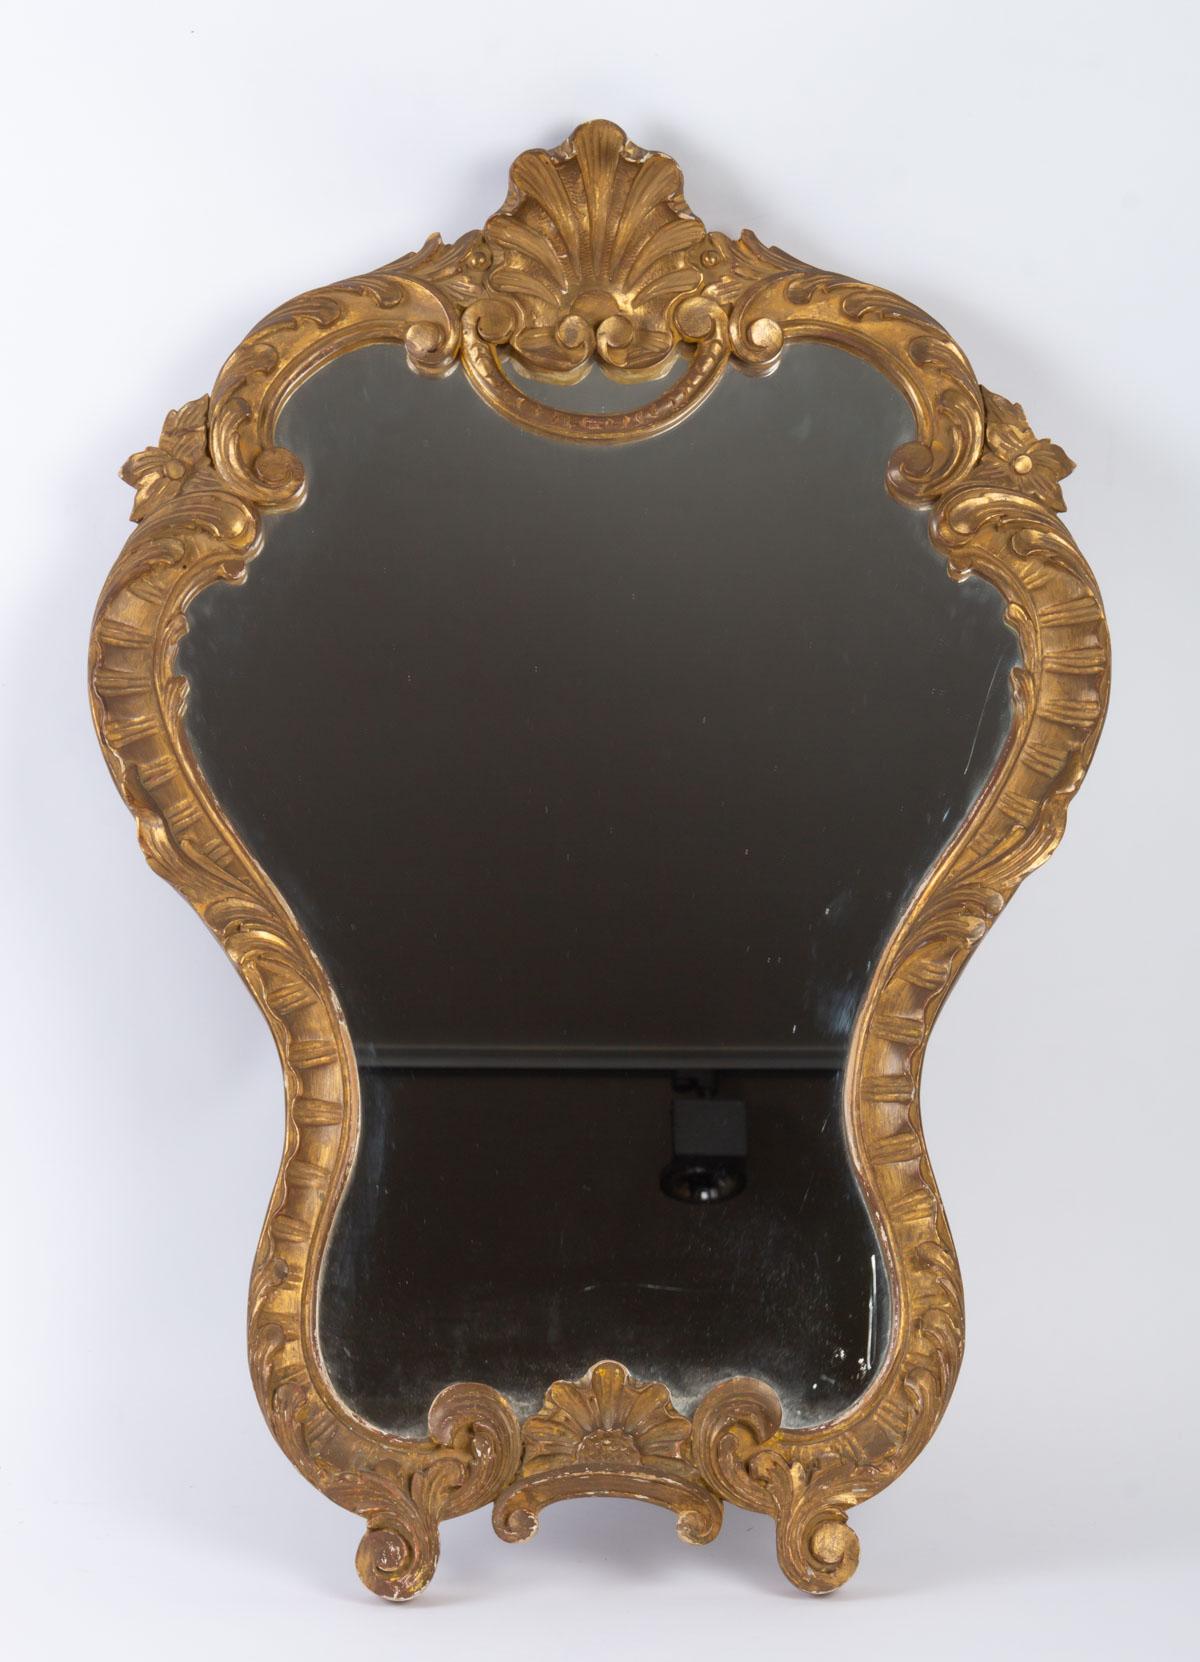 Carved and patinated wooden mirror in the Louis XV style, mid-20th century.
Measures: H 77 cm, W 55 cm, D 7 cm.